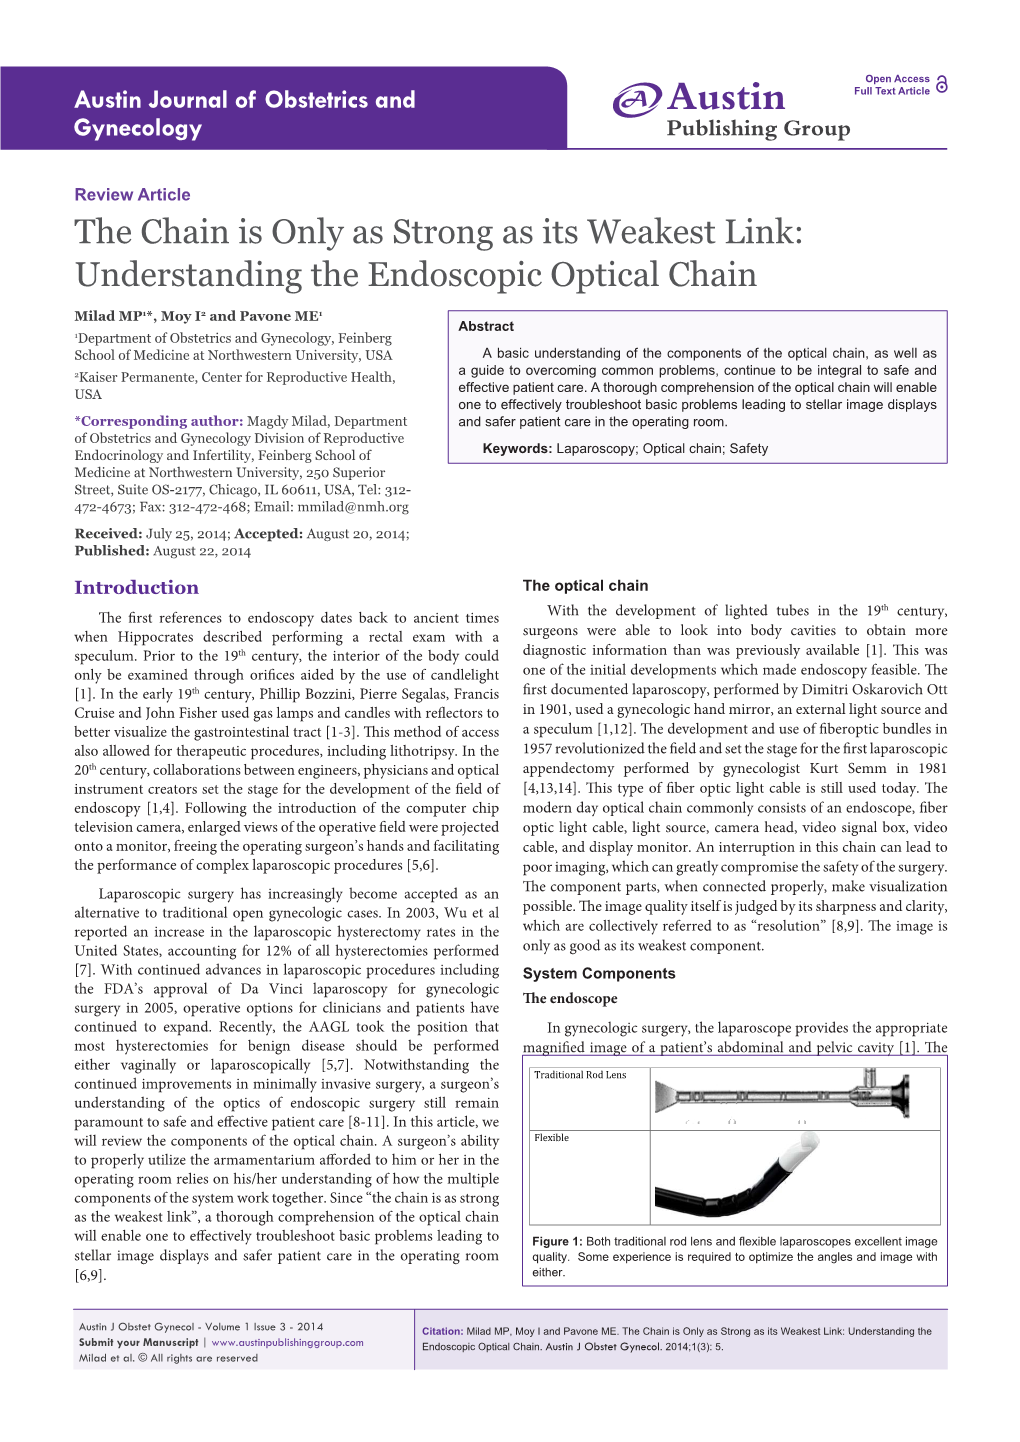 Understanding the Endoscopic Optical Chain